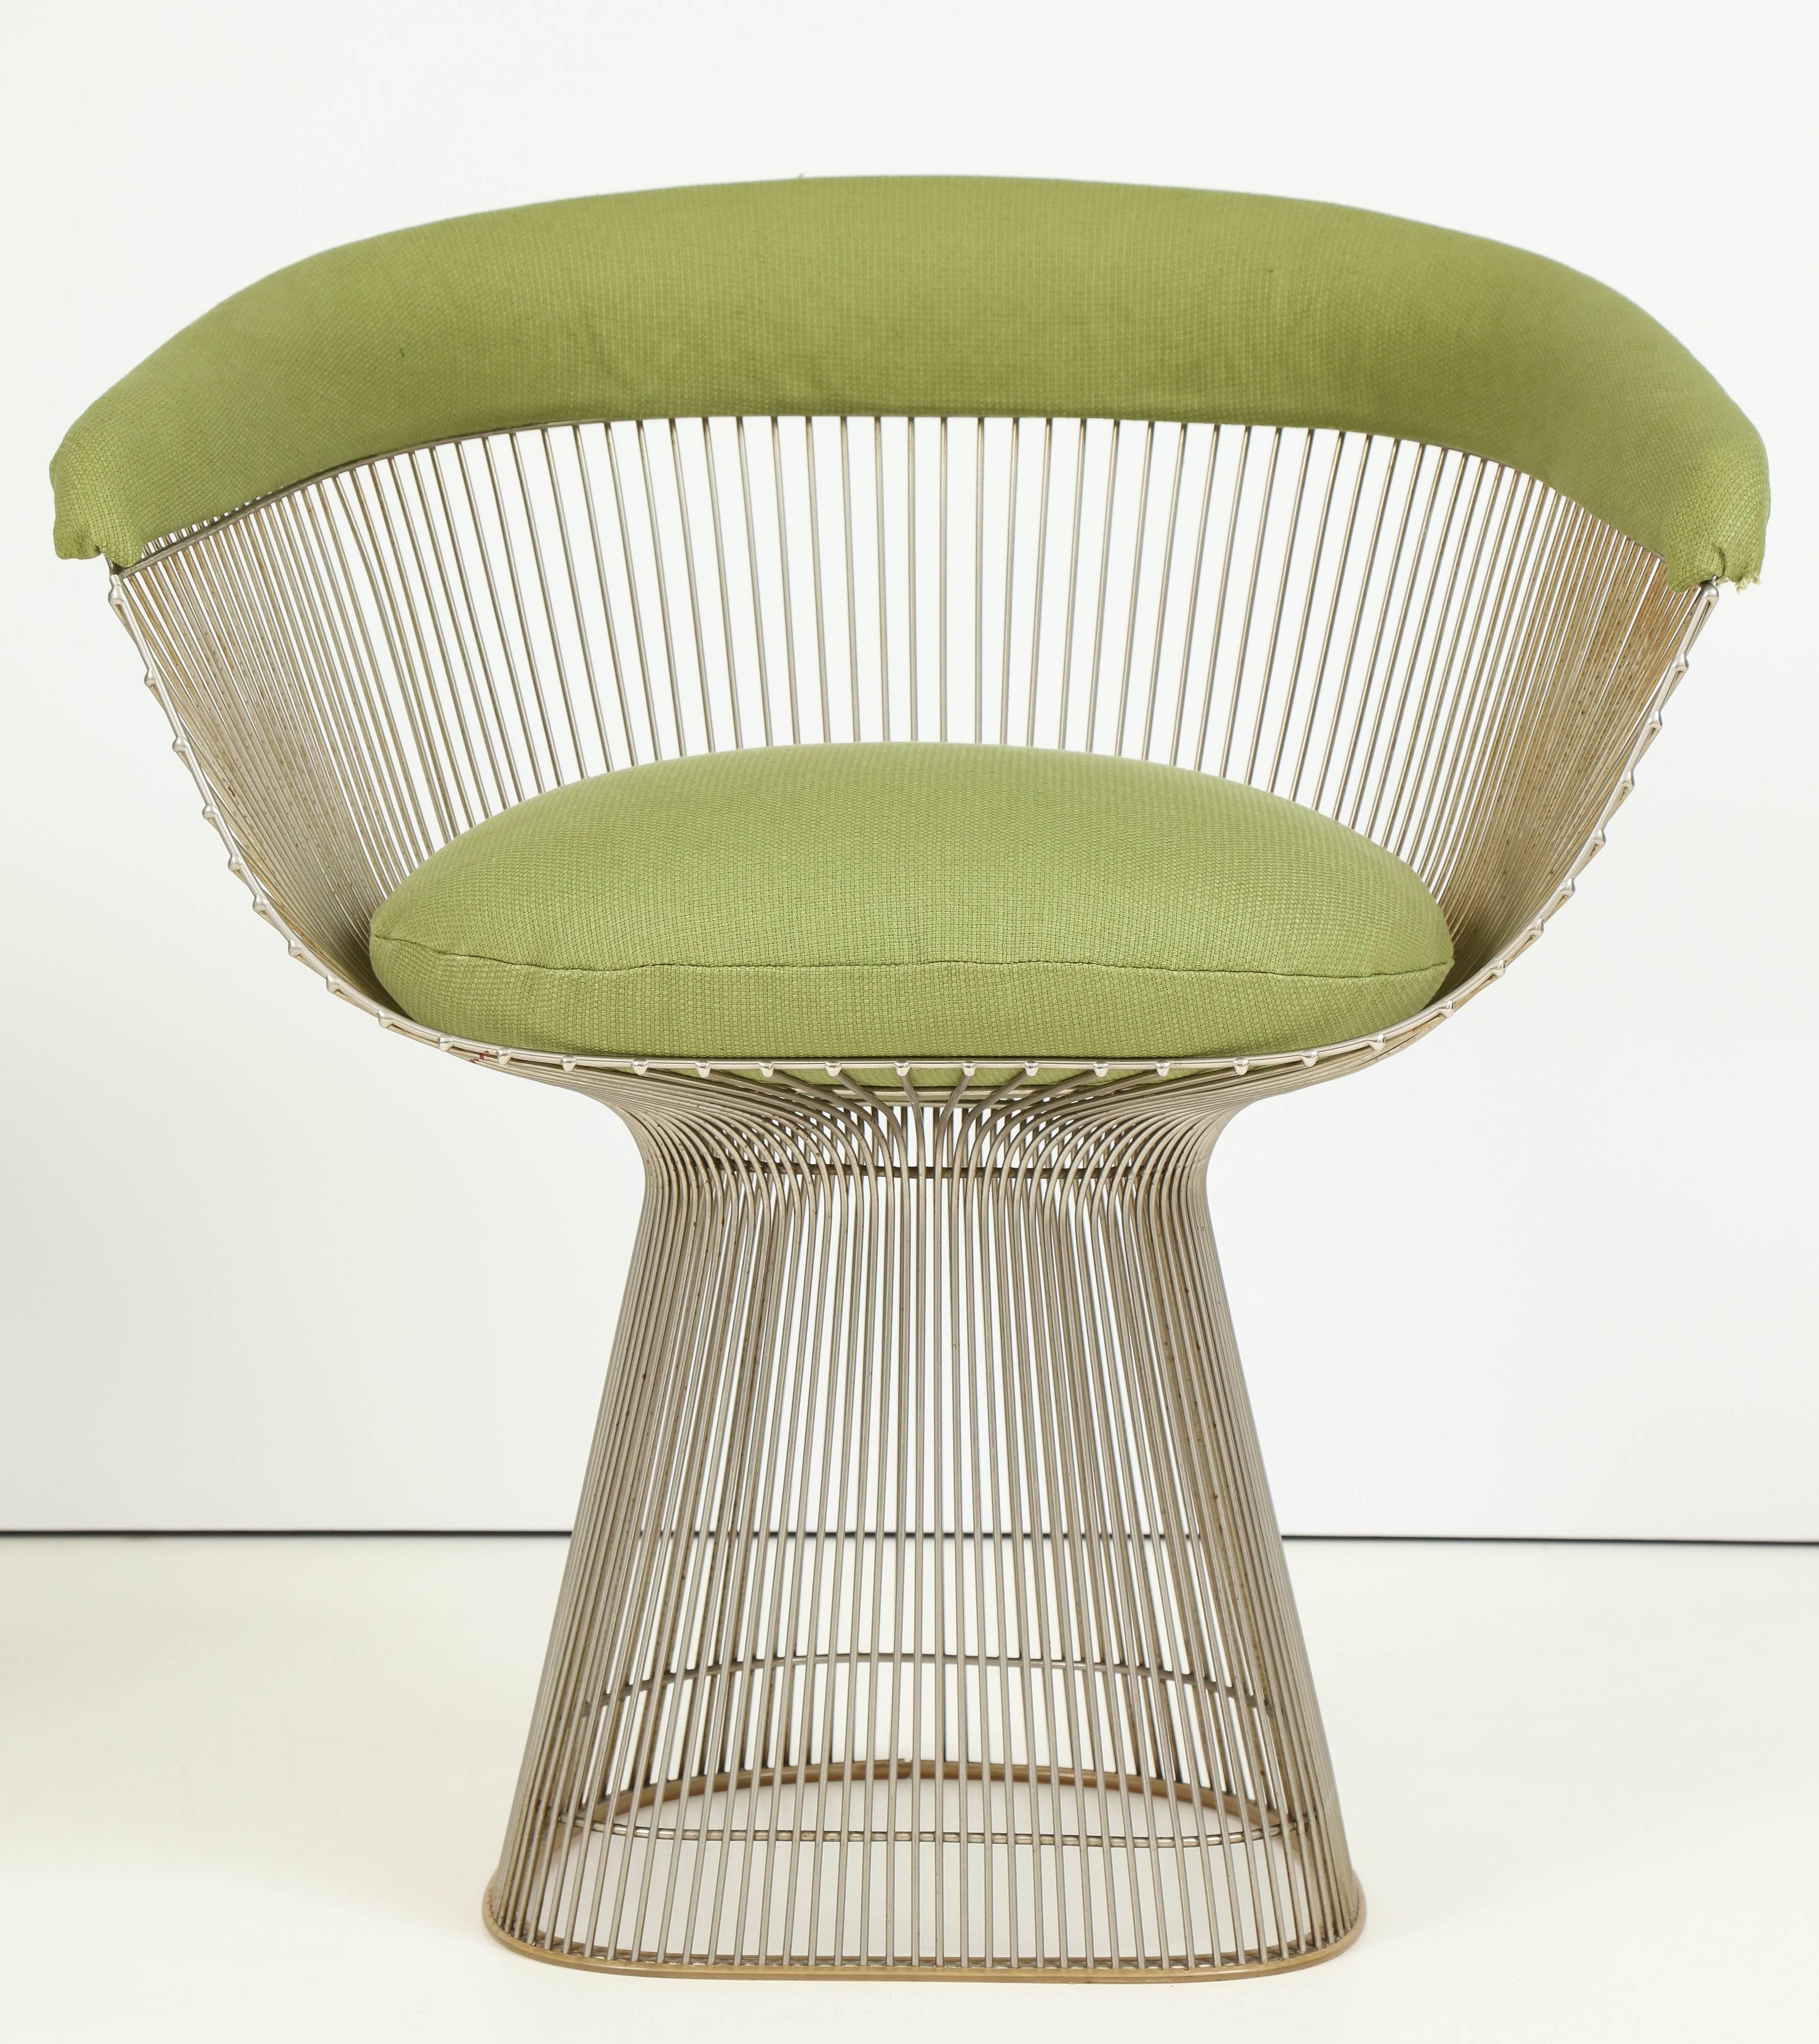 Exceptional set of two dining chairs by Warren Platner made of vertical steel rods
upholstered with green cotton.